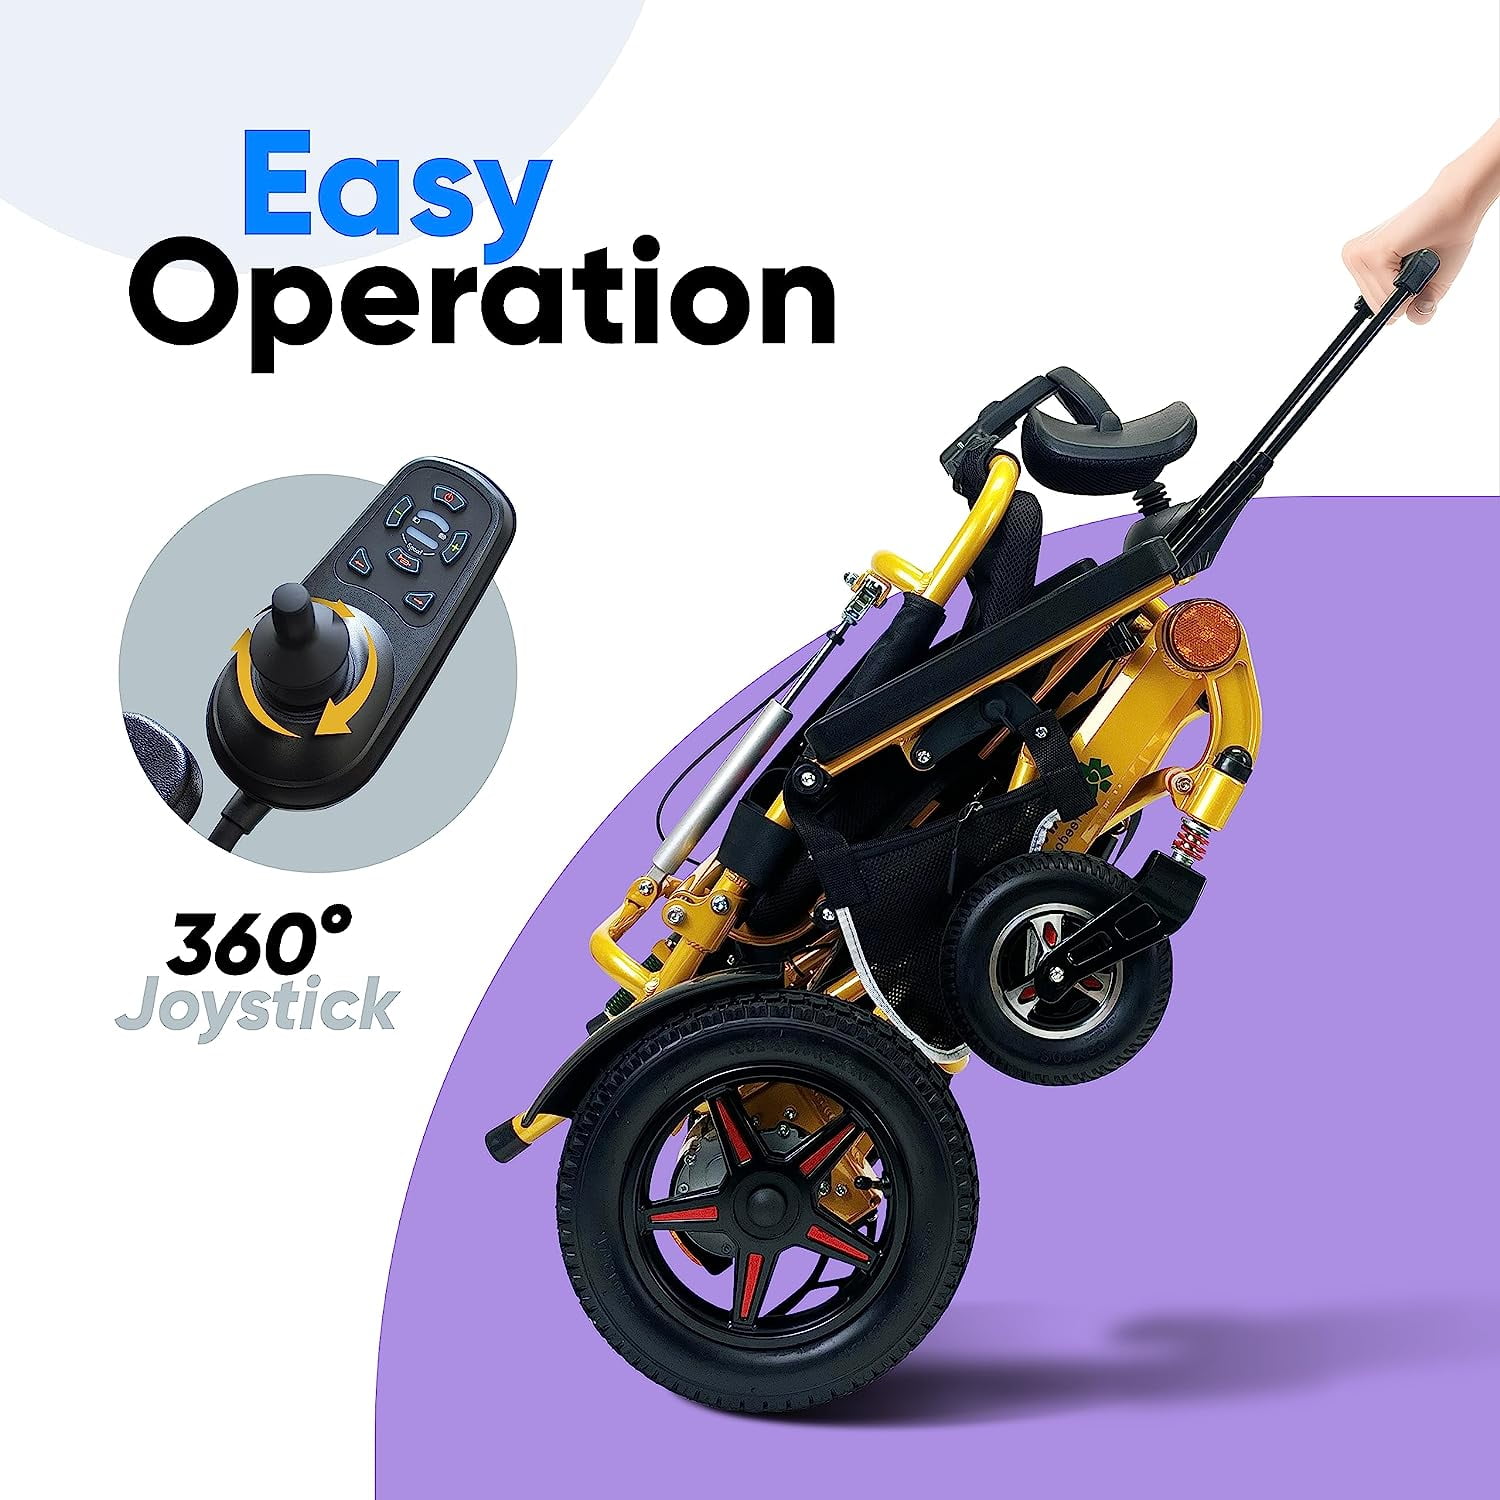 foldable lightweight mobility scooter